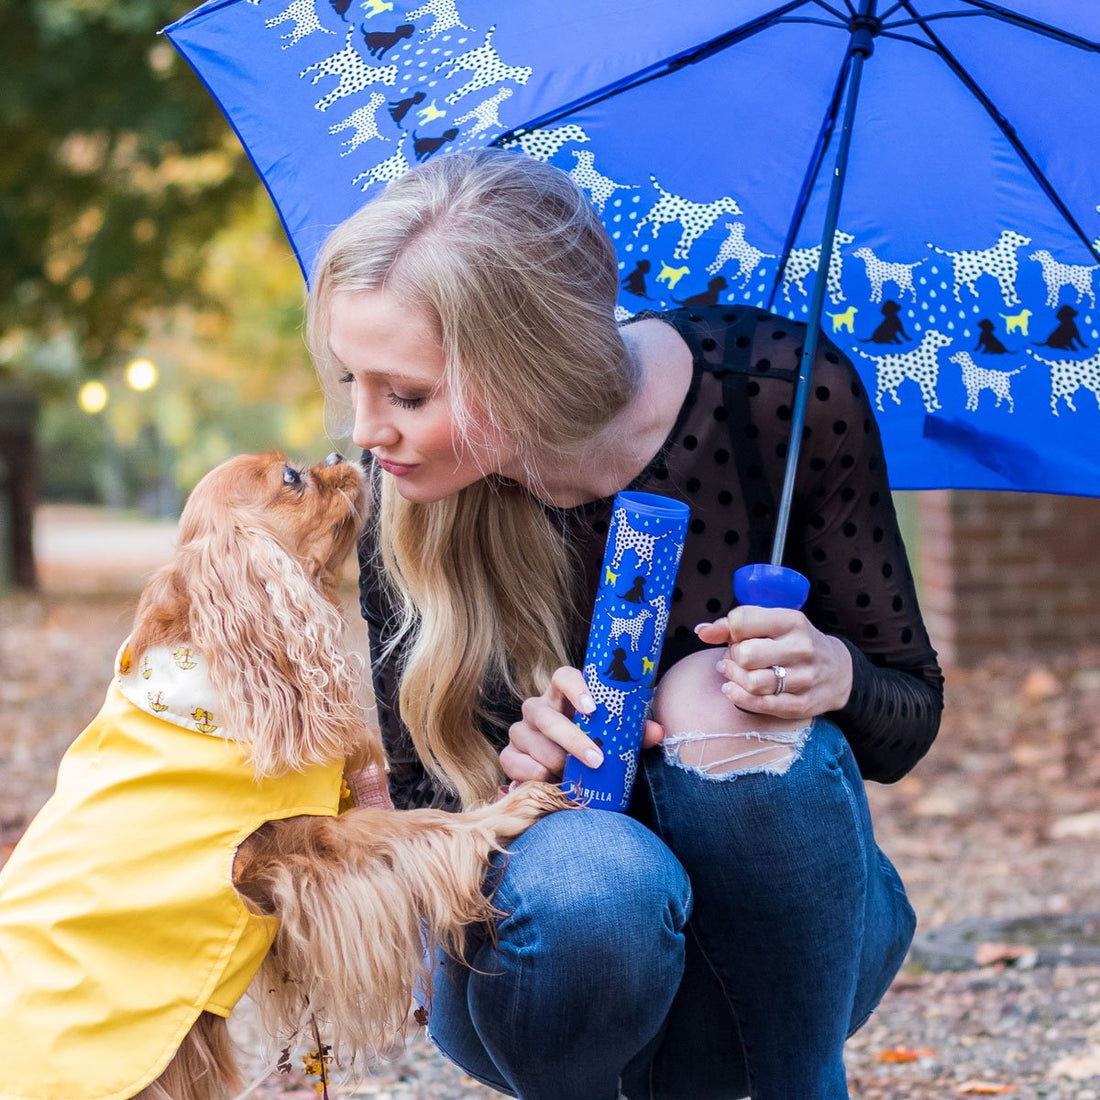  Animal lovers wine bottle umbrella collection by Vinrella